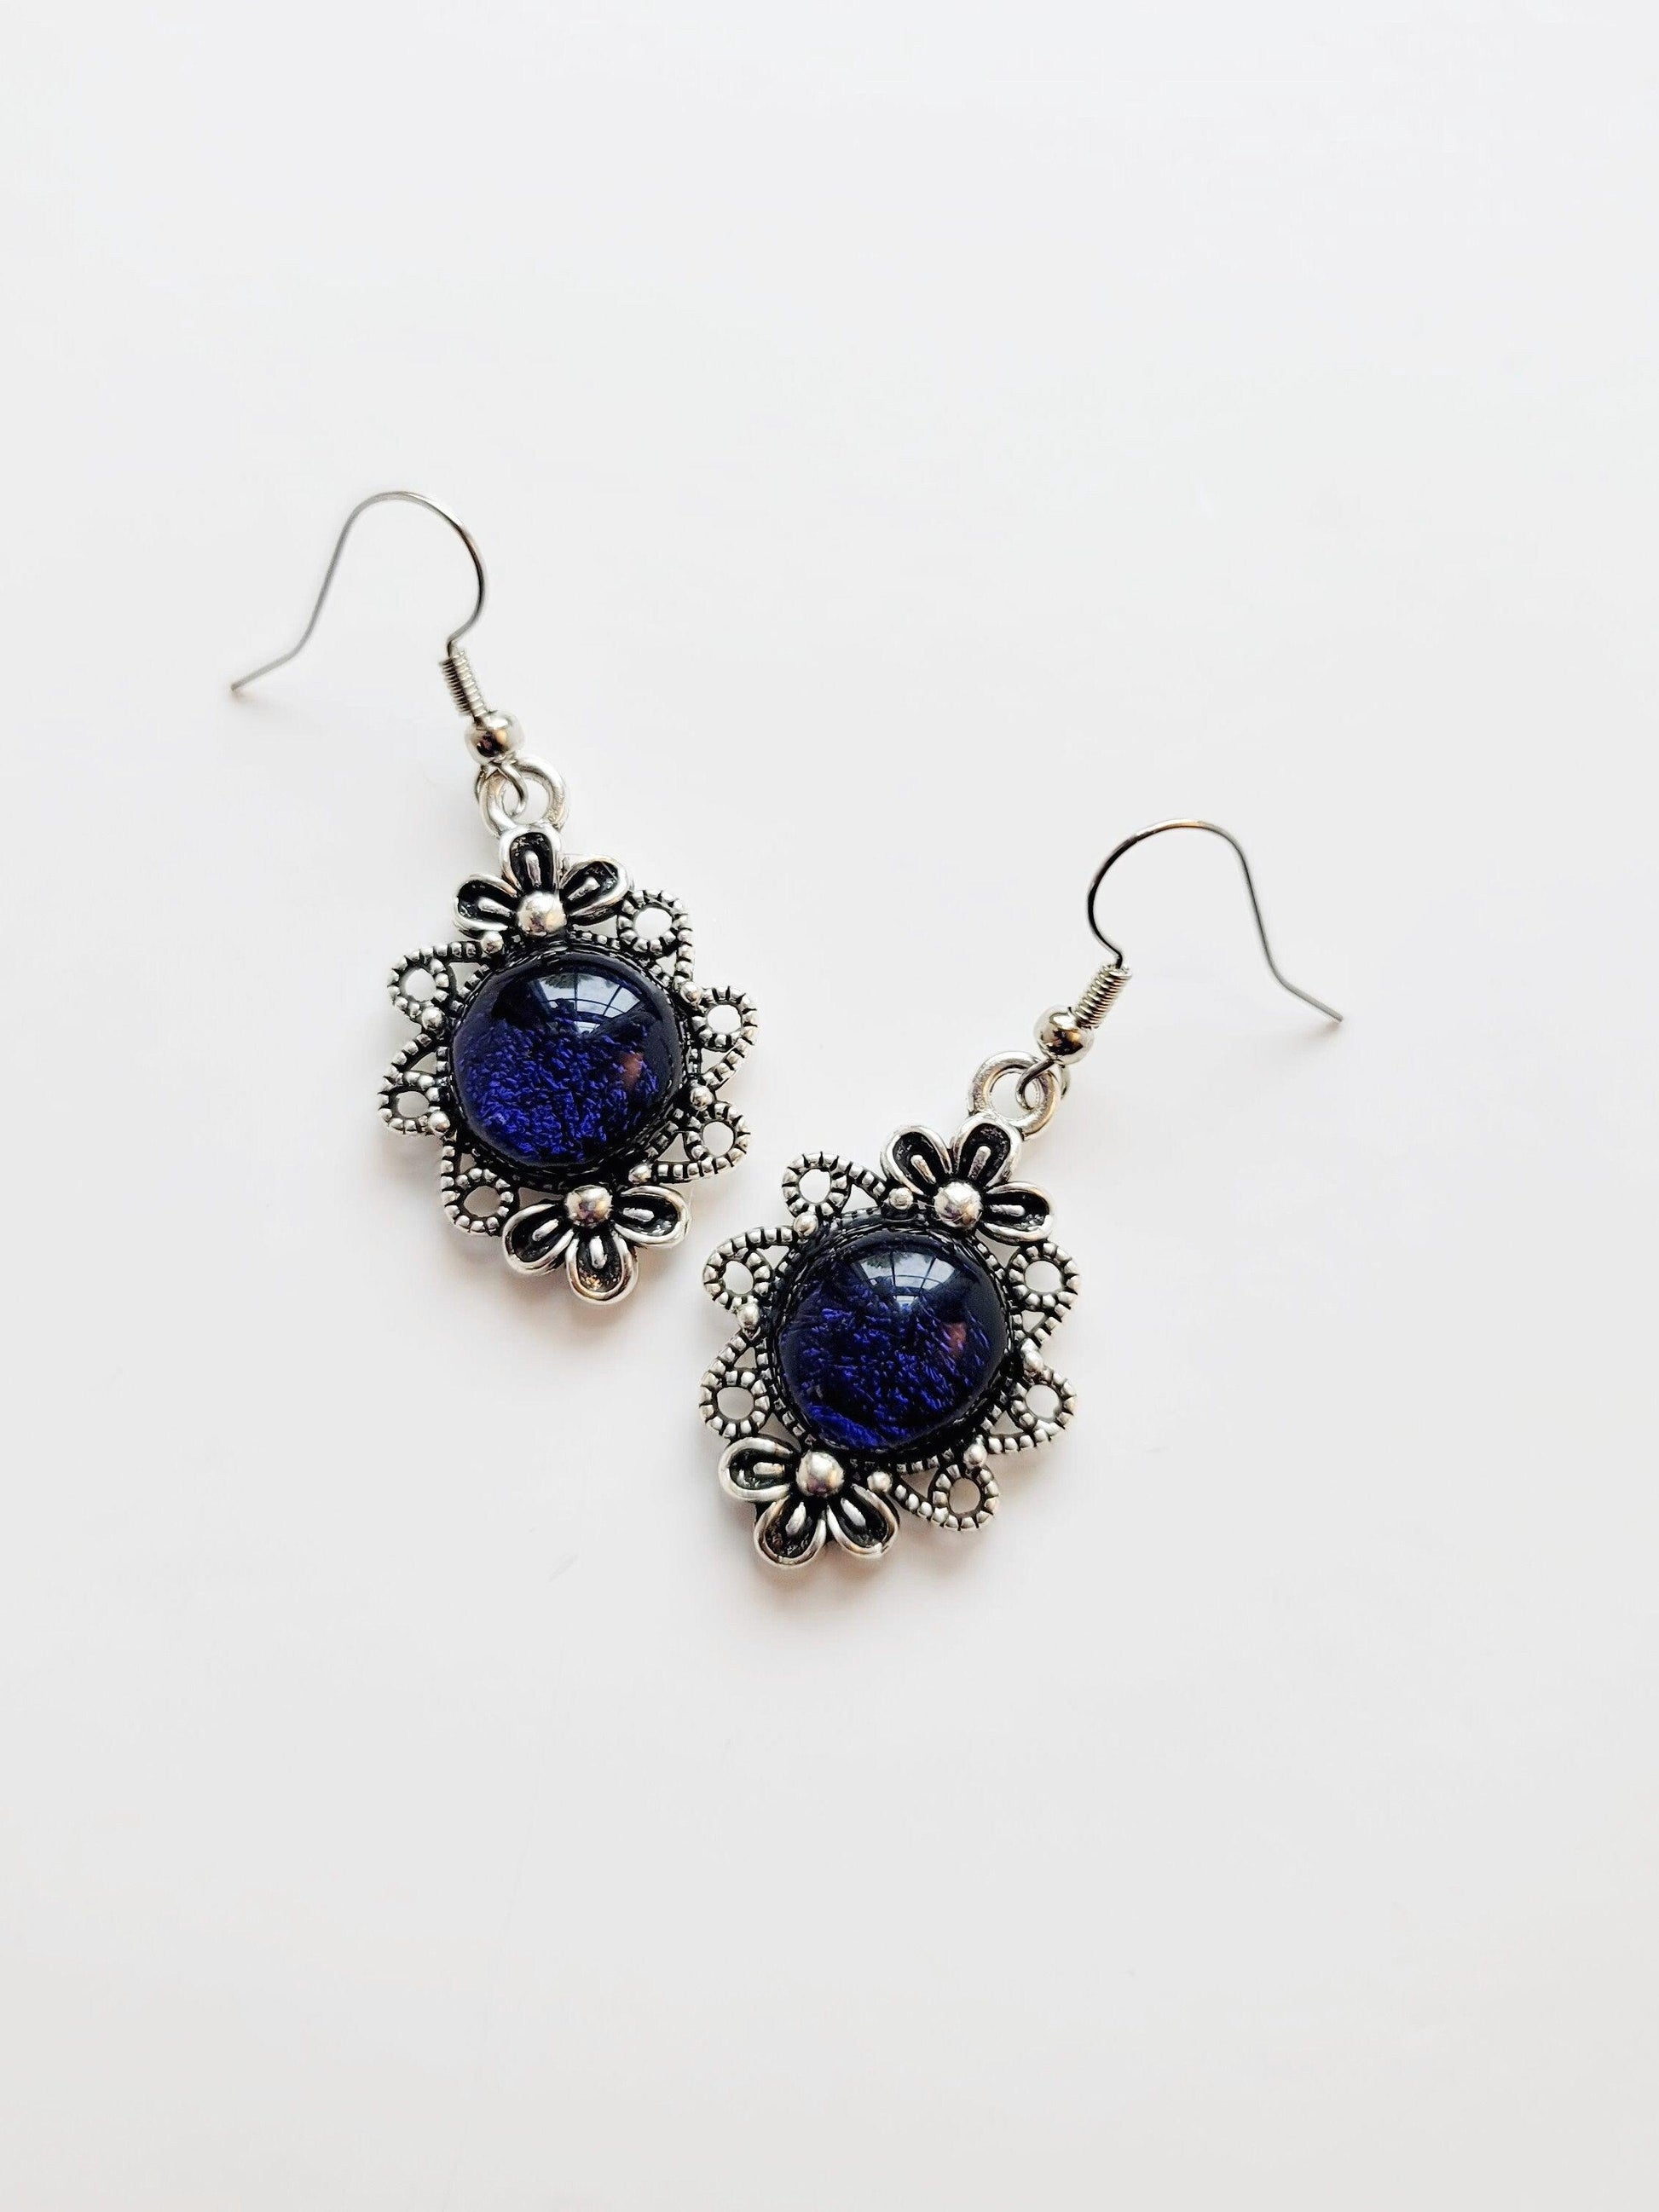 Silver tone flower earrings with dichroic dark blue fused glass cabo pierced style seedsglassworks seeds glassworks